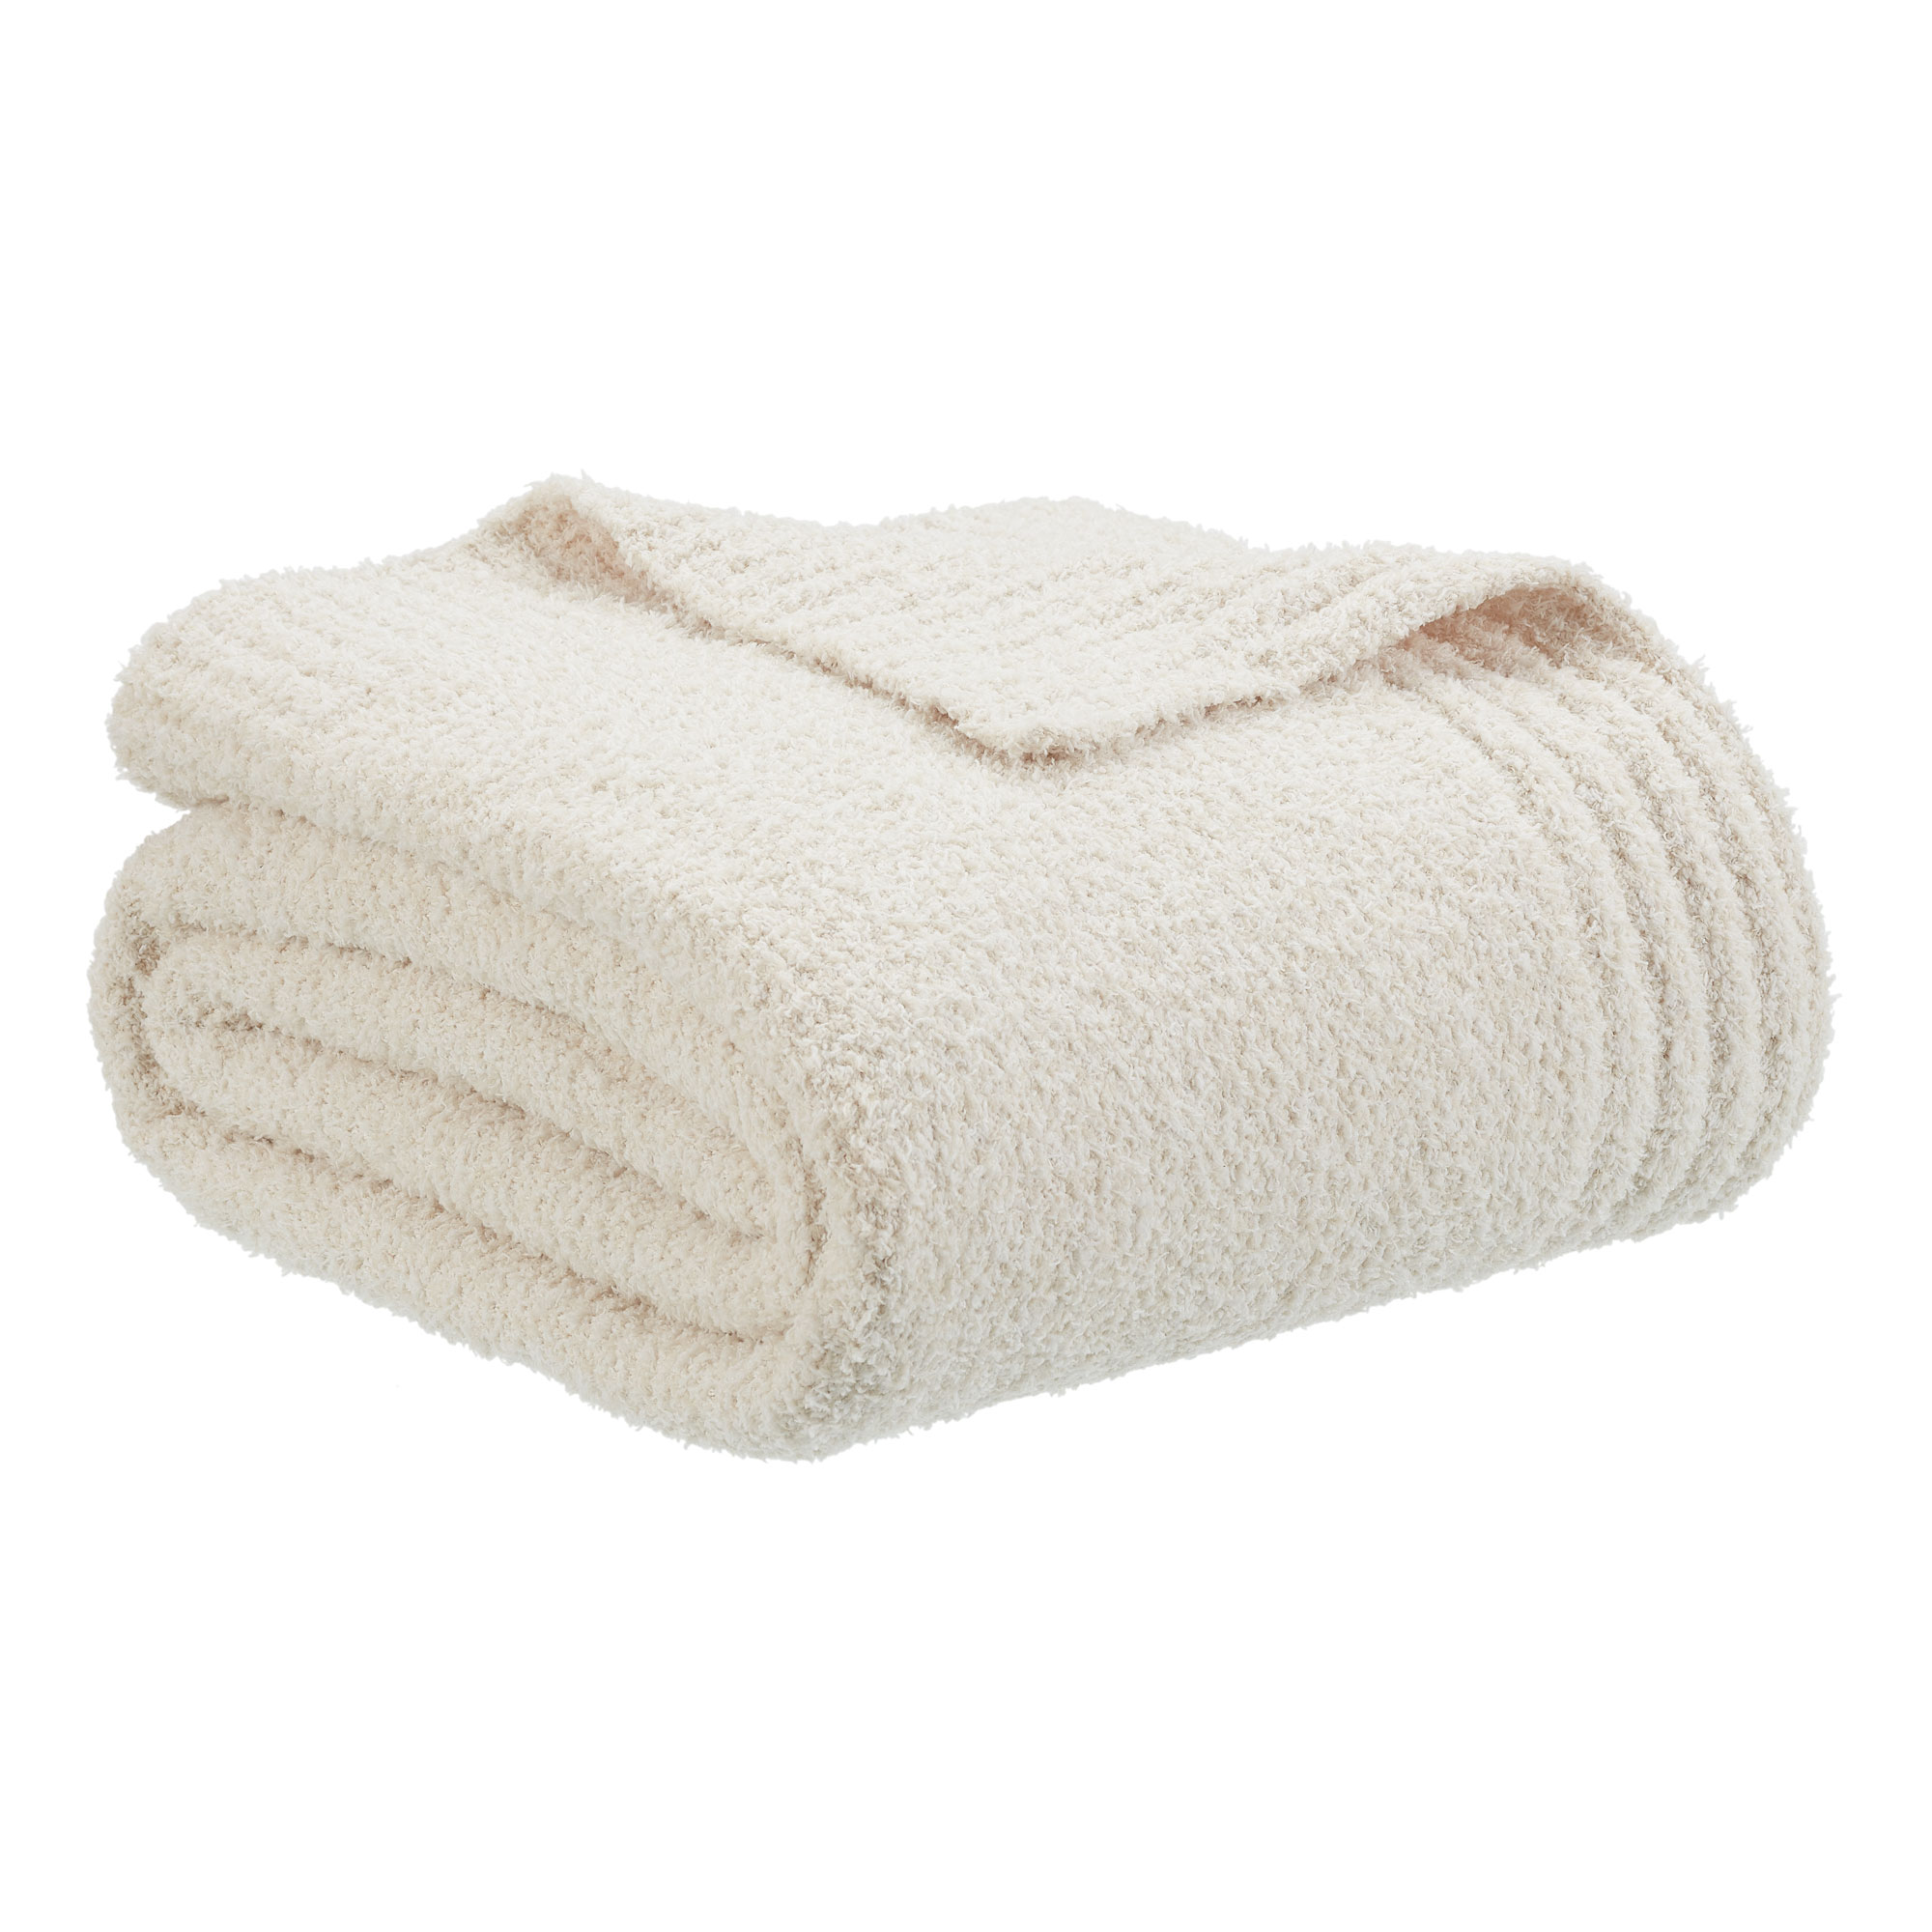 Better Homes & Gardens Cozy Knit Throw, 50"x72", Cream - image 1 of 5